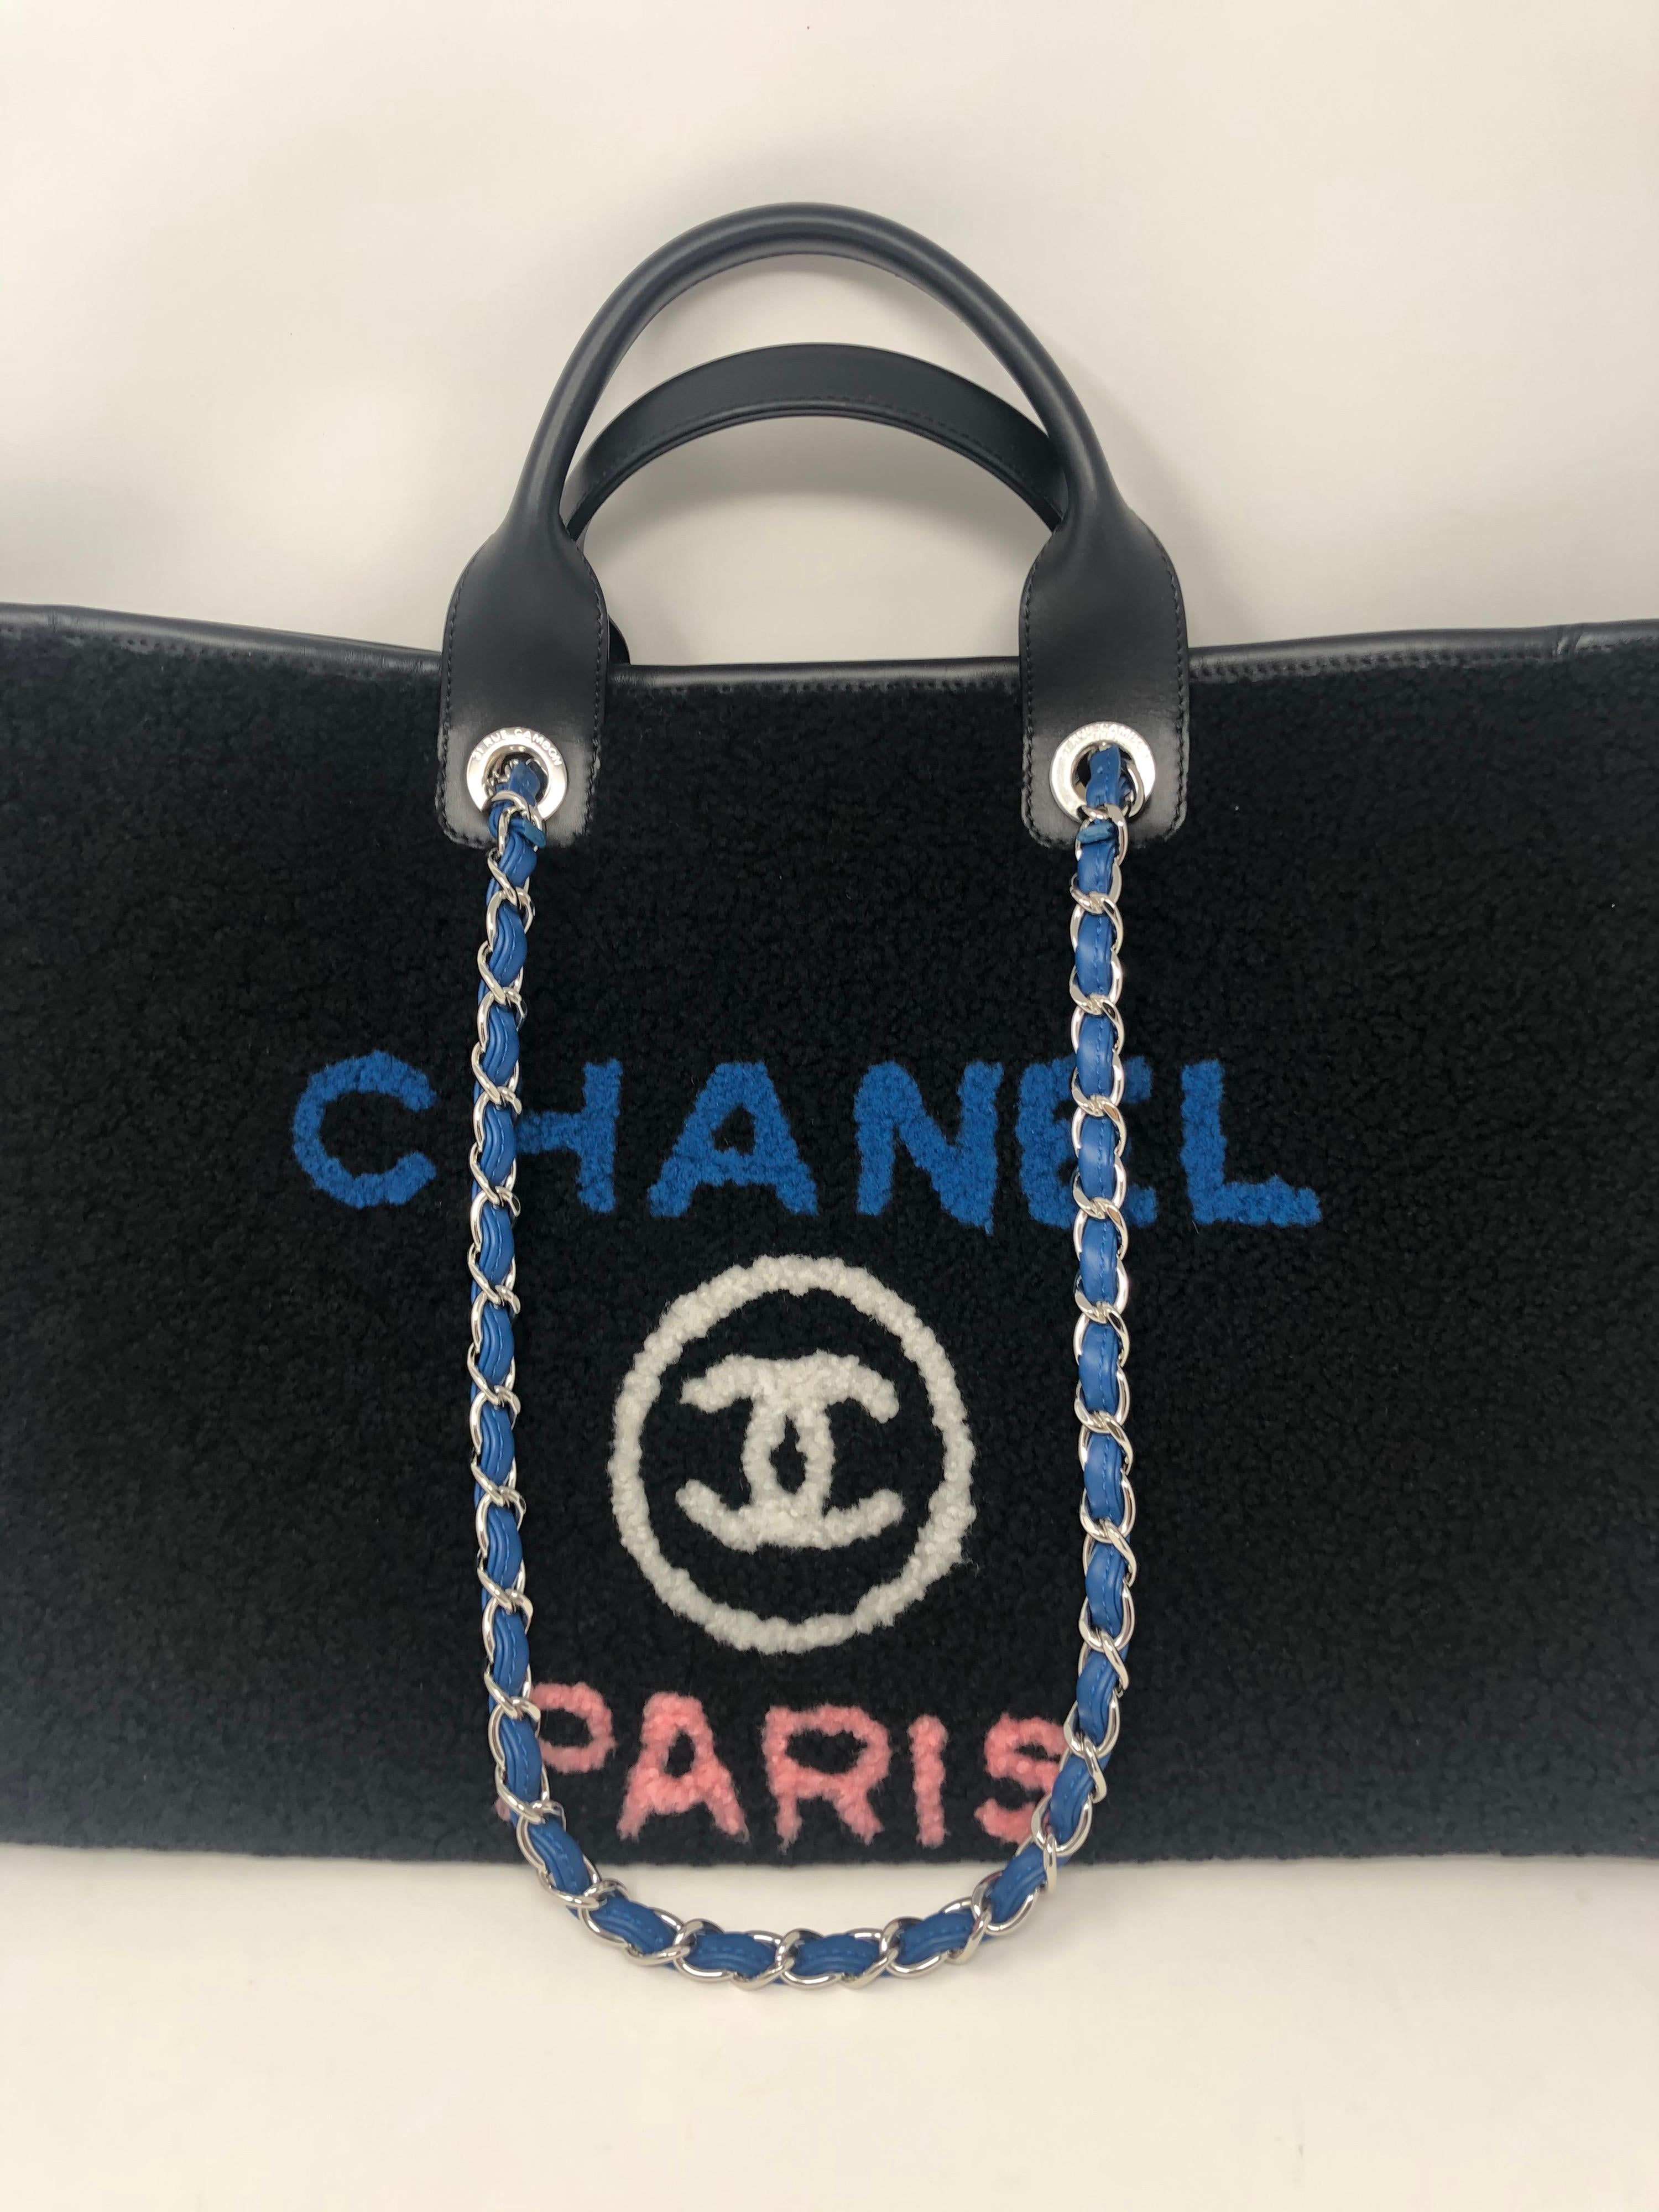 Chanel Shearling Deauville X-Large Tote Bag. From 2018 Fall/ Winter Collection. Limited and rare large size tote bag. Excellent condition like new. Plastic still on hardware on inside. Great for travel and everyday wear. Guaranteed authentic. 